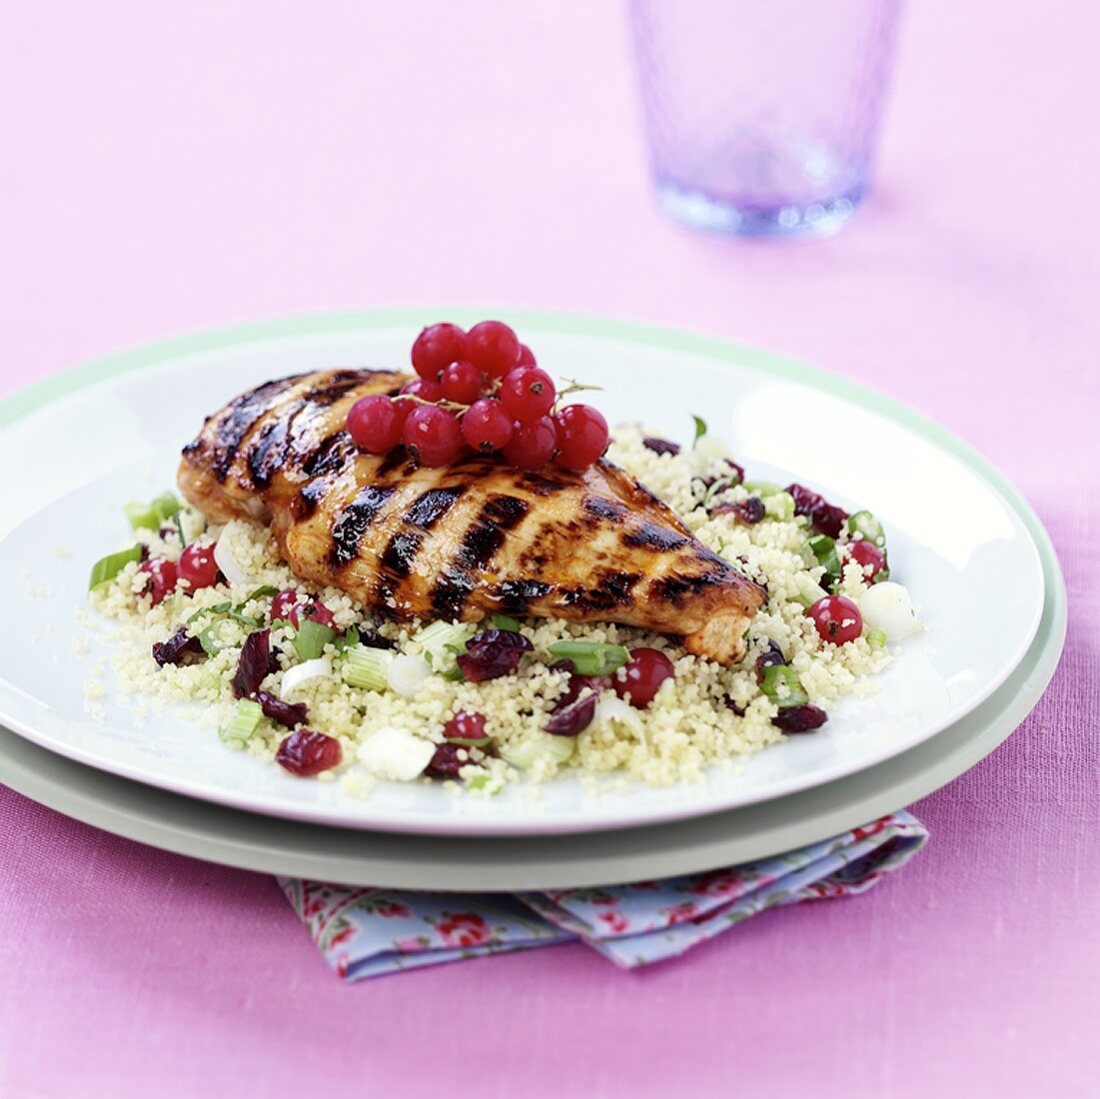 Grilled chicken breast with berry couscous